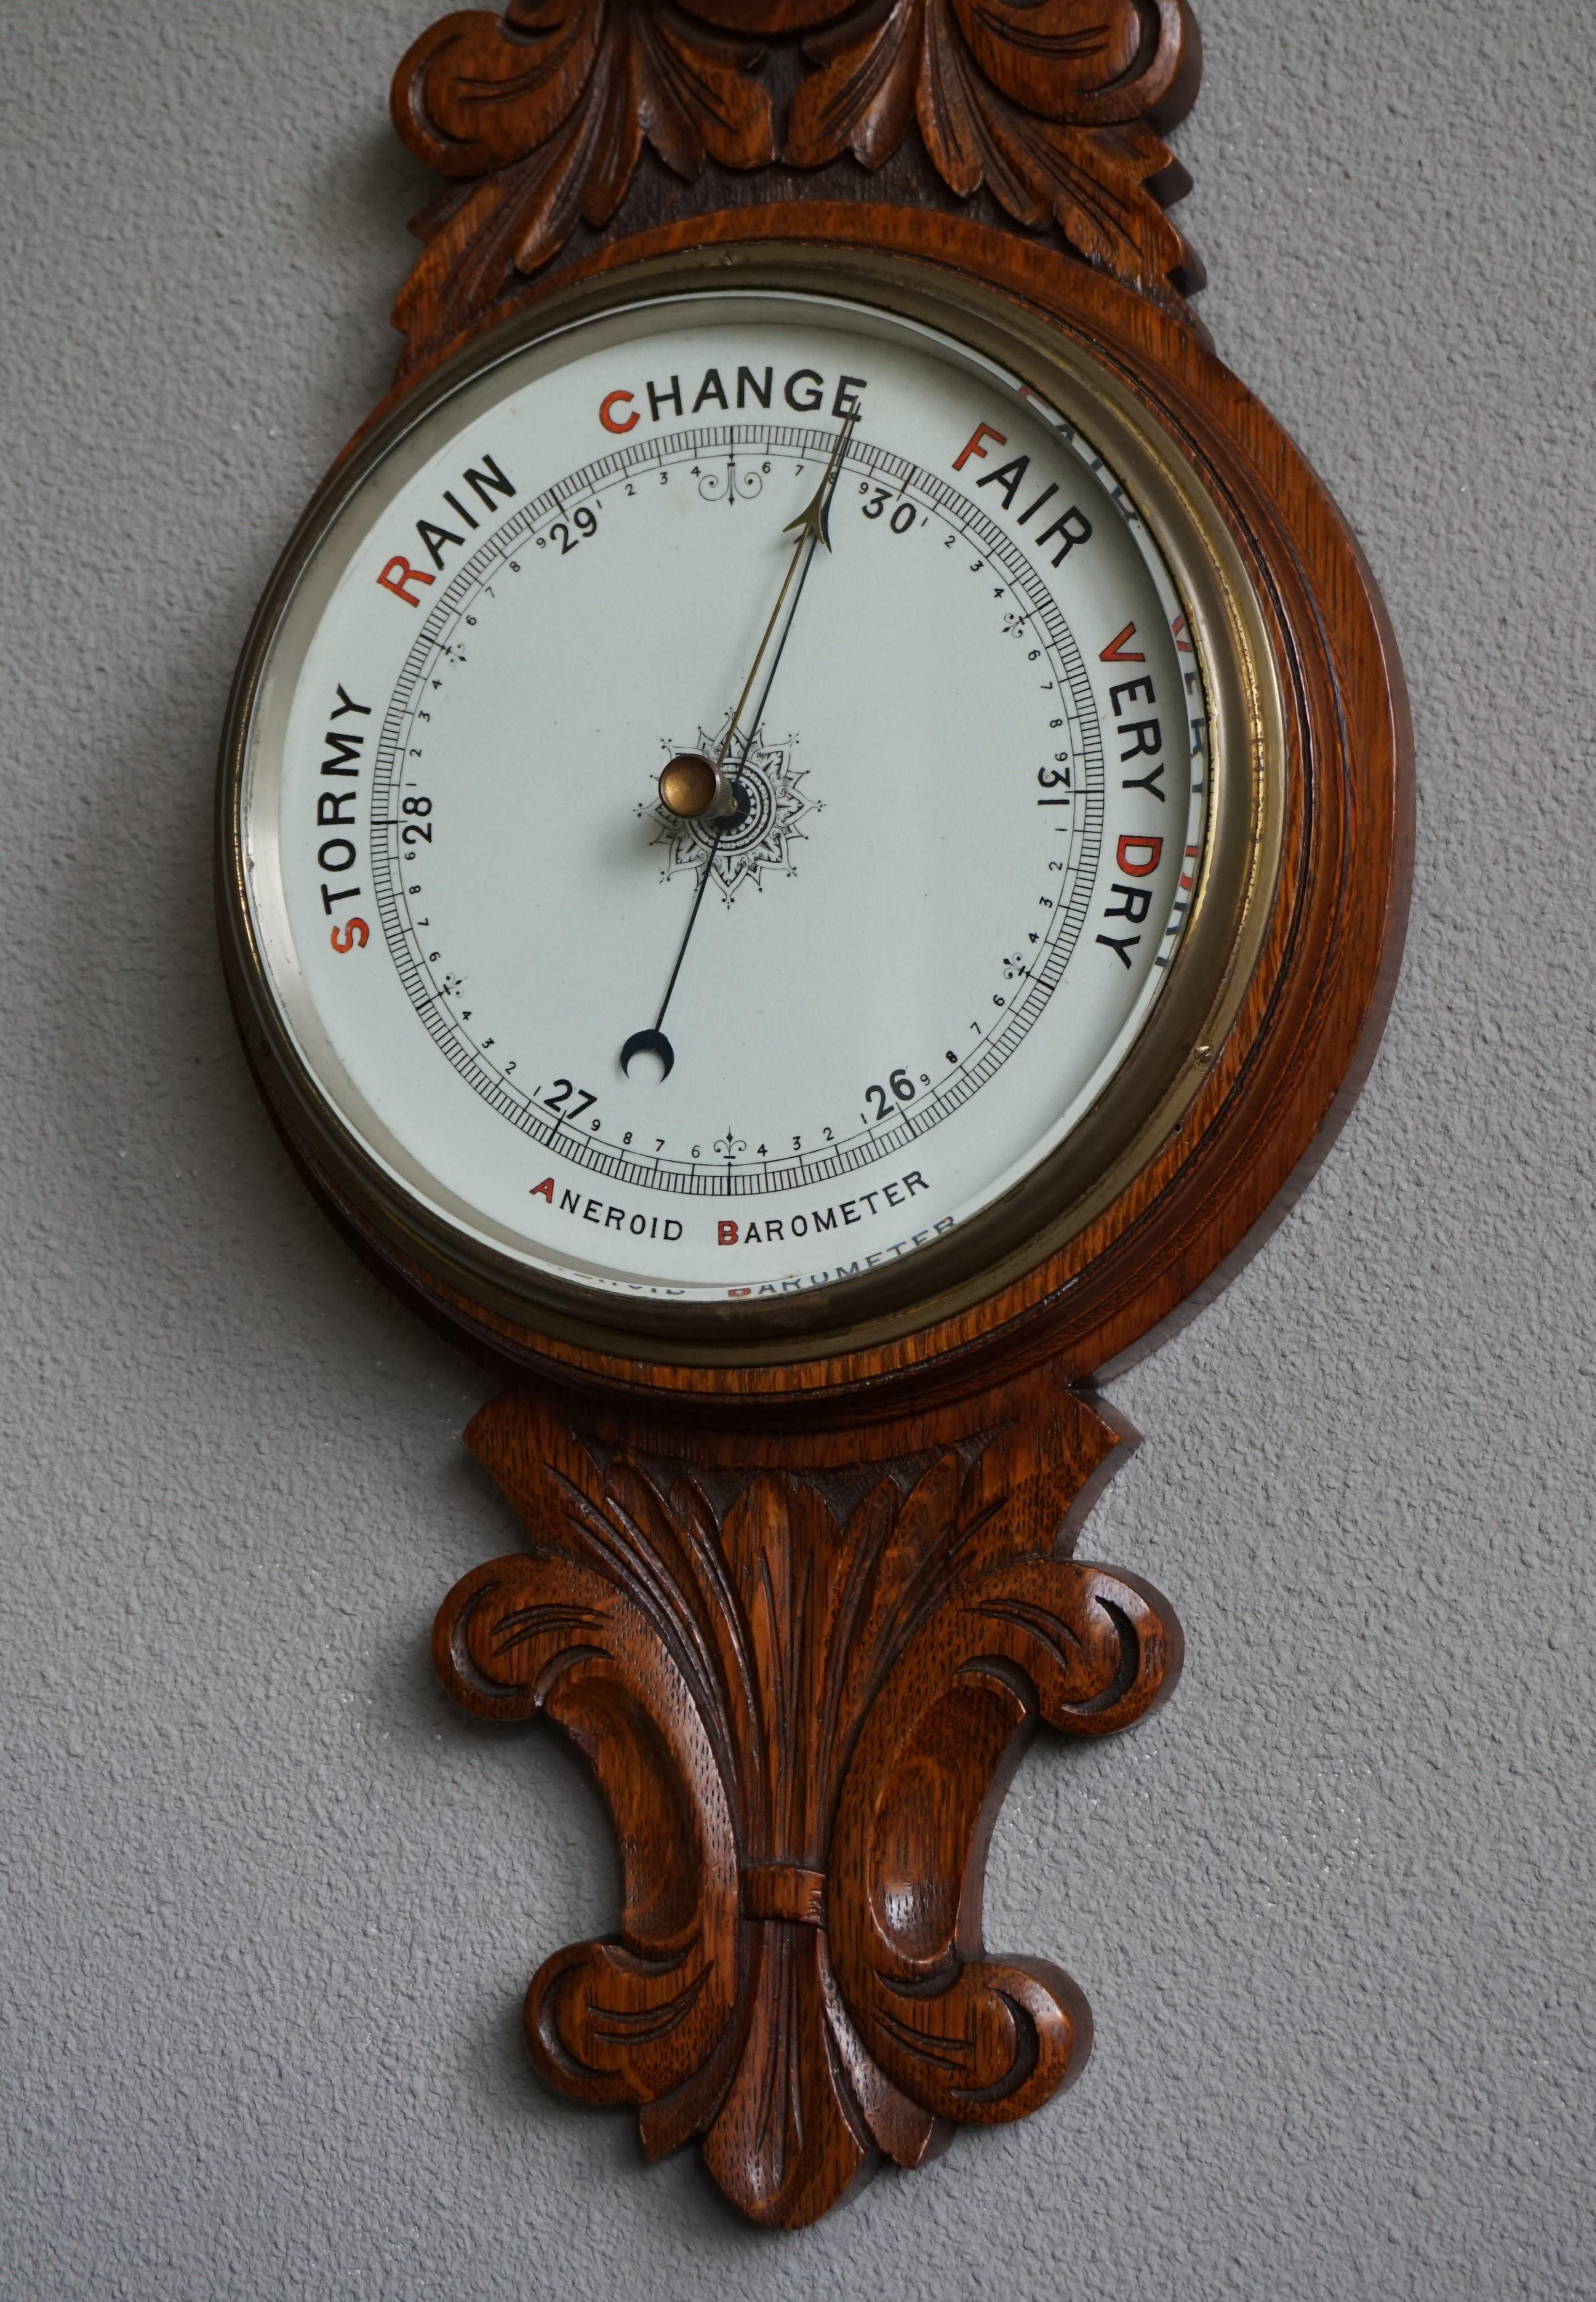 Stunning design and top quality executed antique barometer.

This late 19th-early 20th century, English manufactured wall barometer has everything that makes an antique worthwhile. The quality of the workmanship is second to none. The carvings in